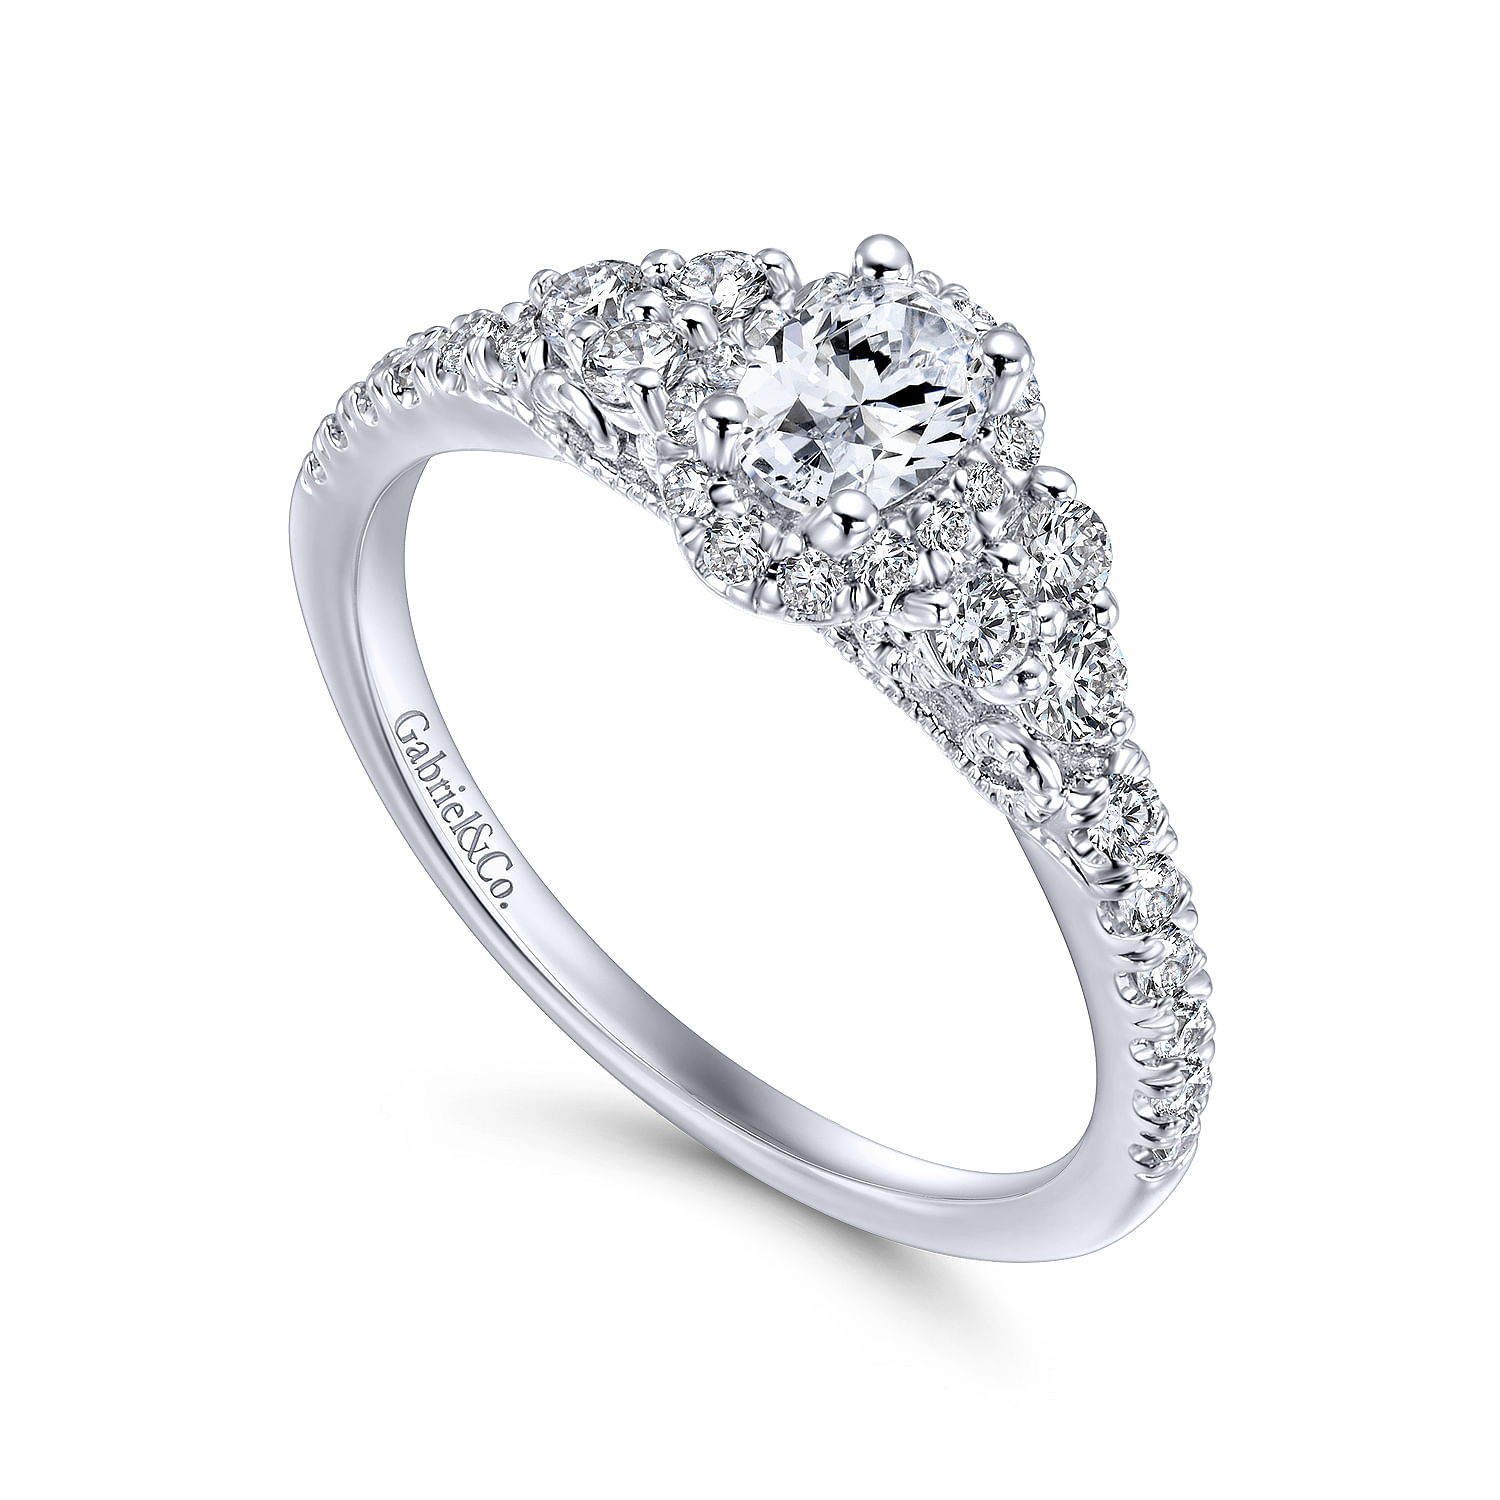 14K White Gold Oval Halo Complete Diamond Engagement Ring